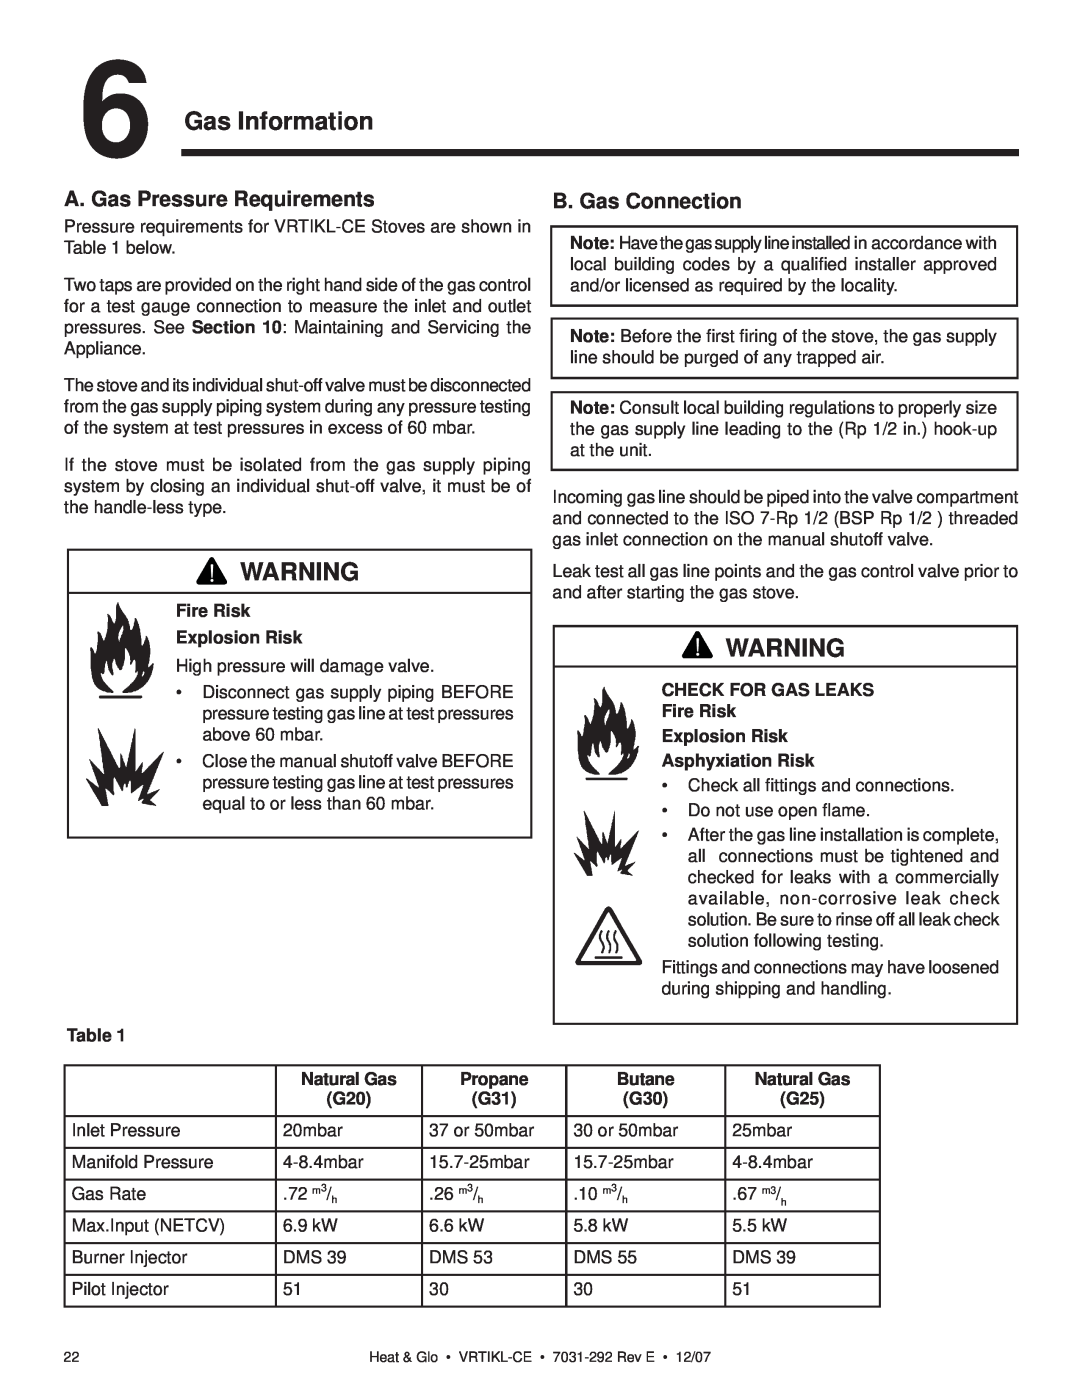 Hearth and Home Technologies VRT-GY-N-CE Gas Information, A. Gas Pressure Requirements, B. Gas Connection, Natural Gas 